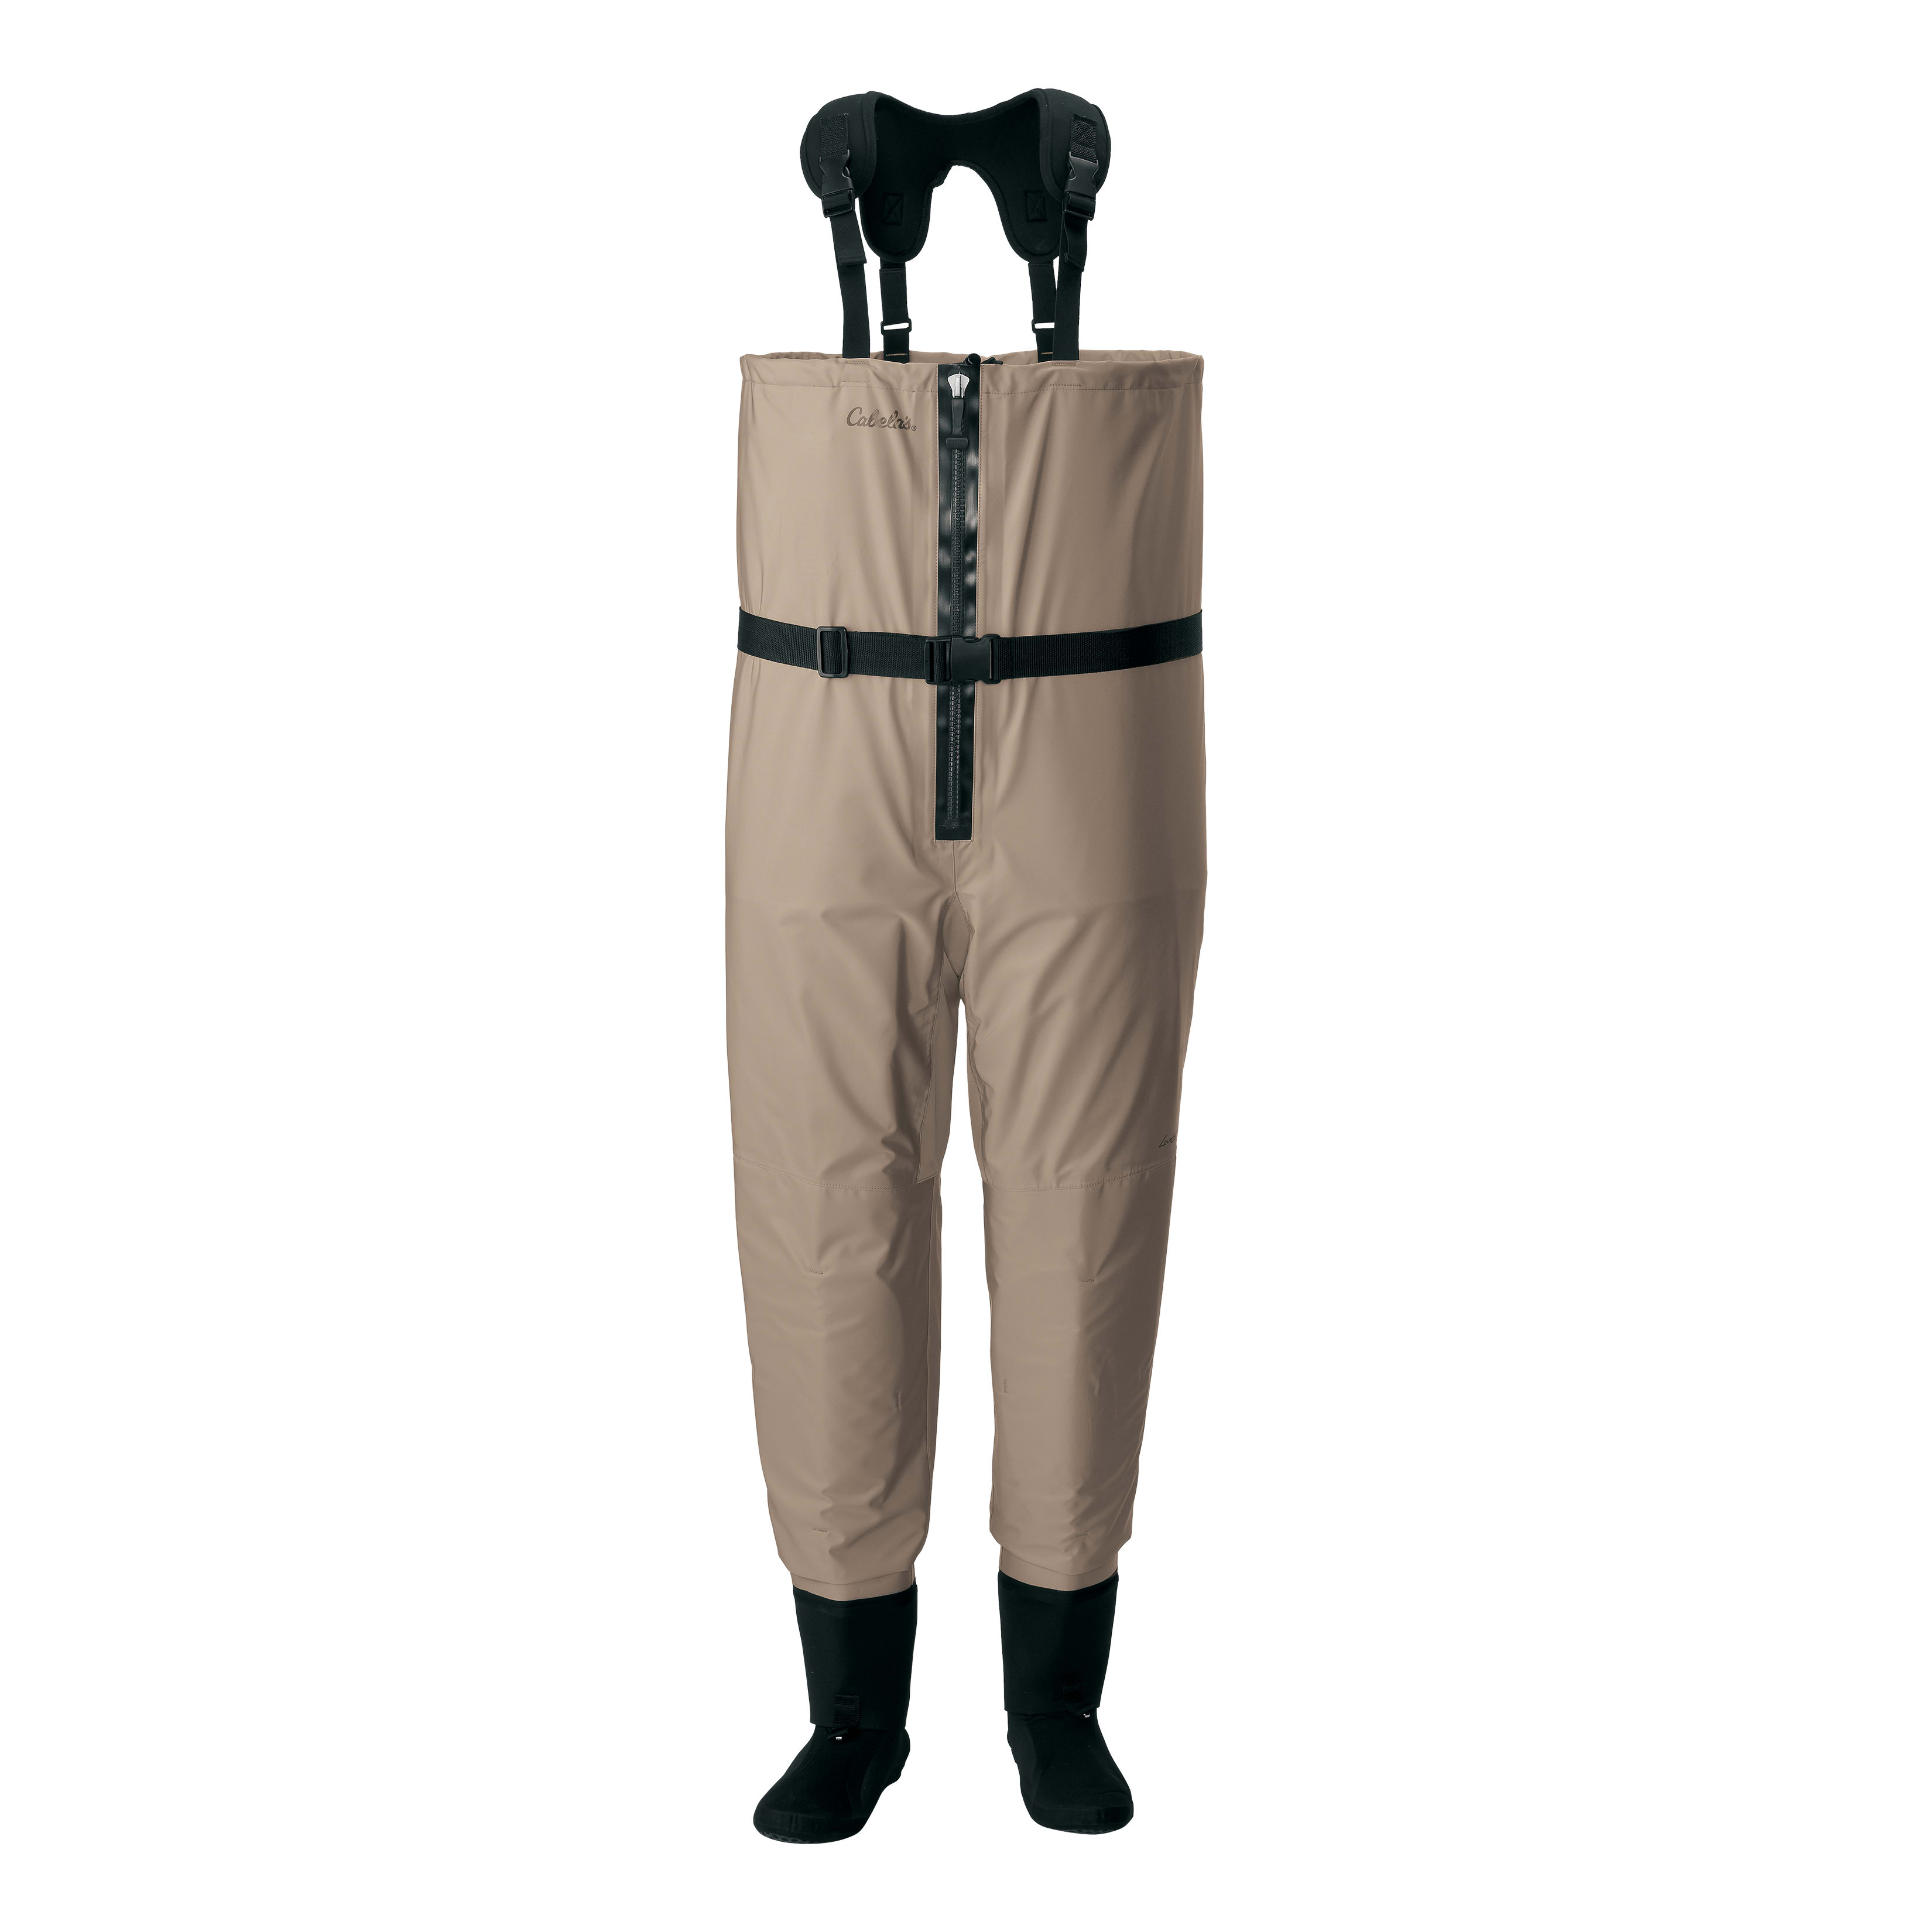 Cabela’s Men’s Premium Zip Breathable Stockingfoot Fishing Waders with 4MOST DRY-PLUS™